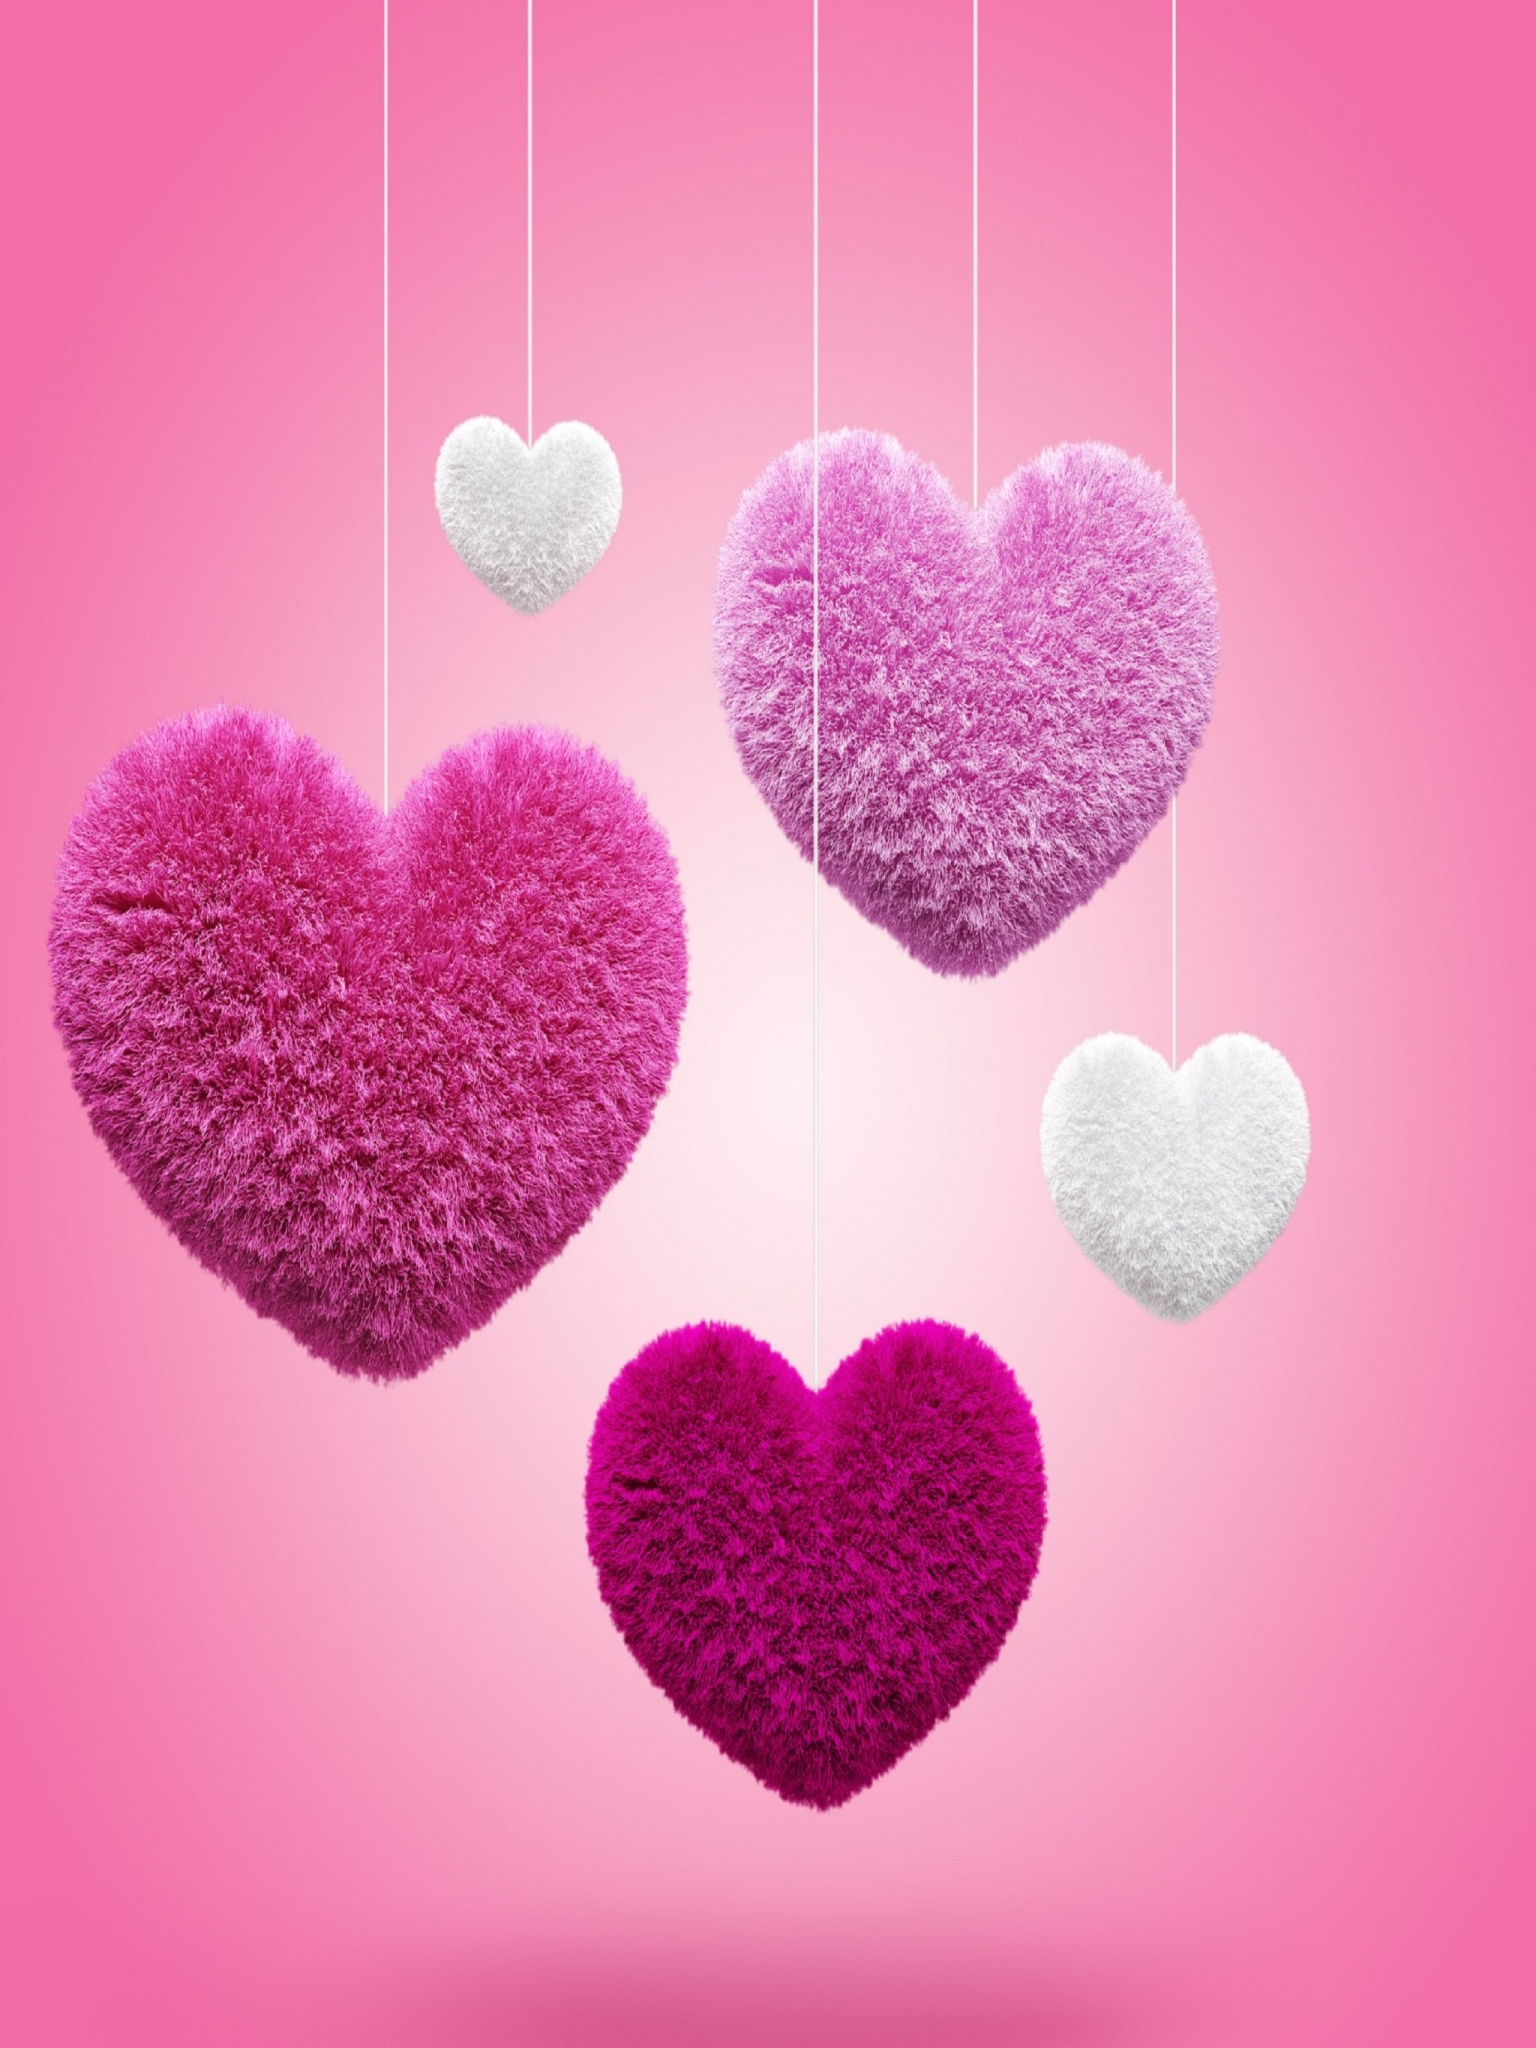 Fluffy Hearts for Apple iPad Air 2 resolution